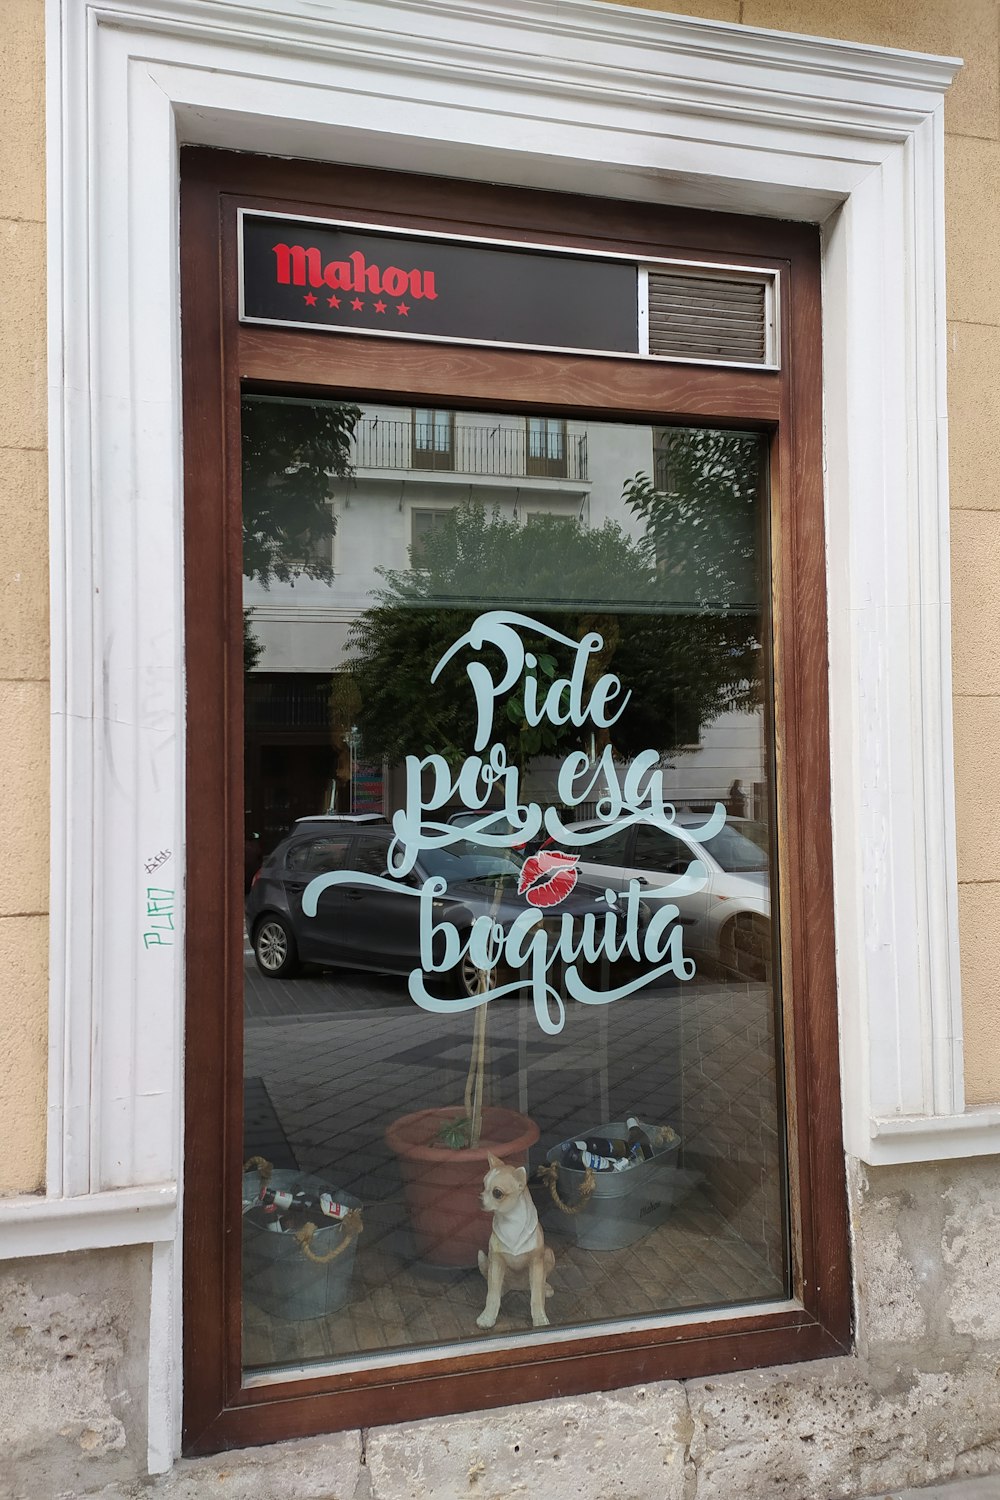 a window with a sign that says pride por eso baguita